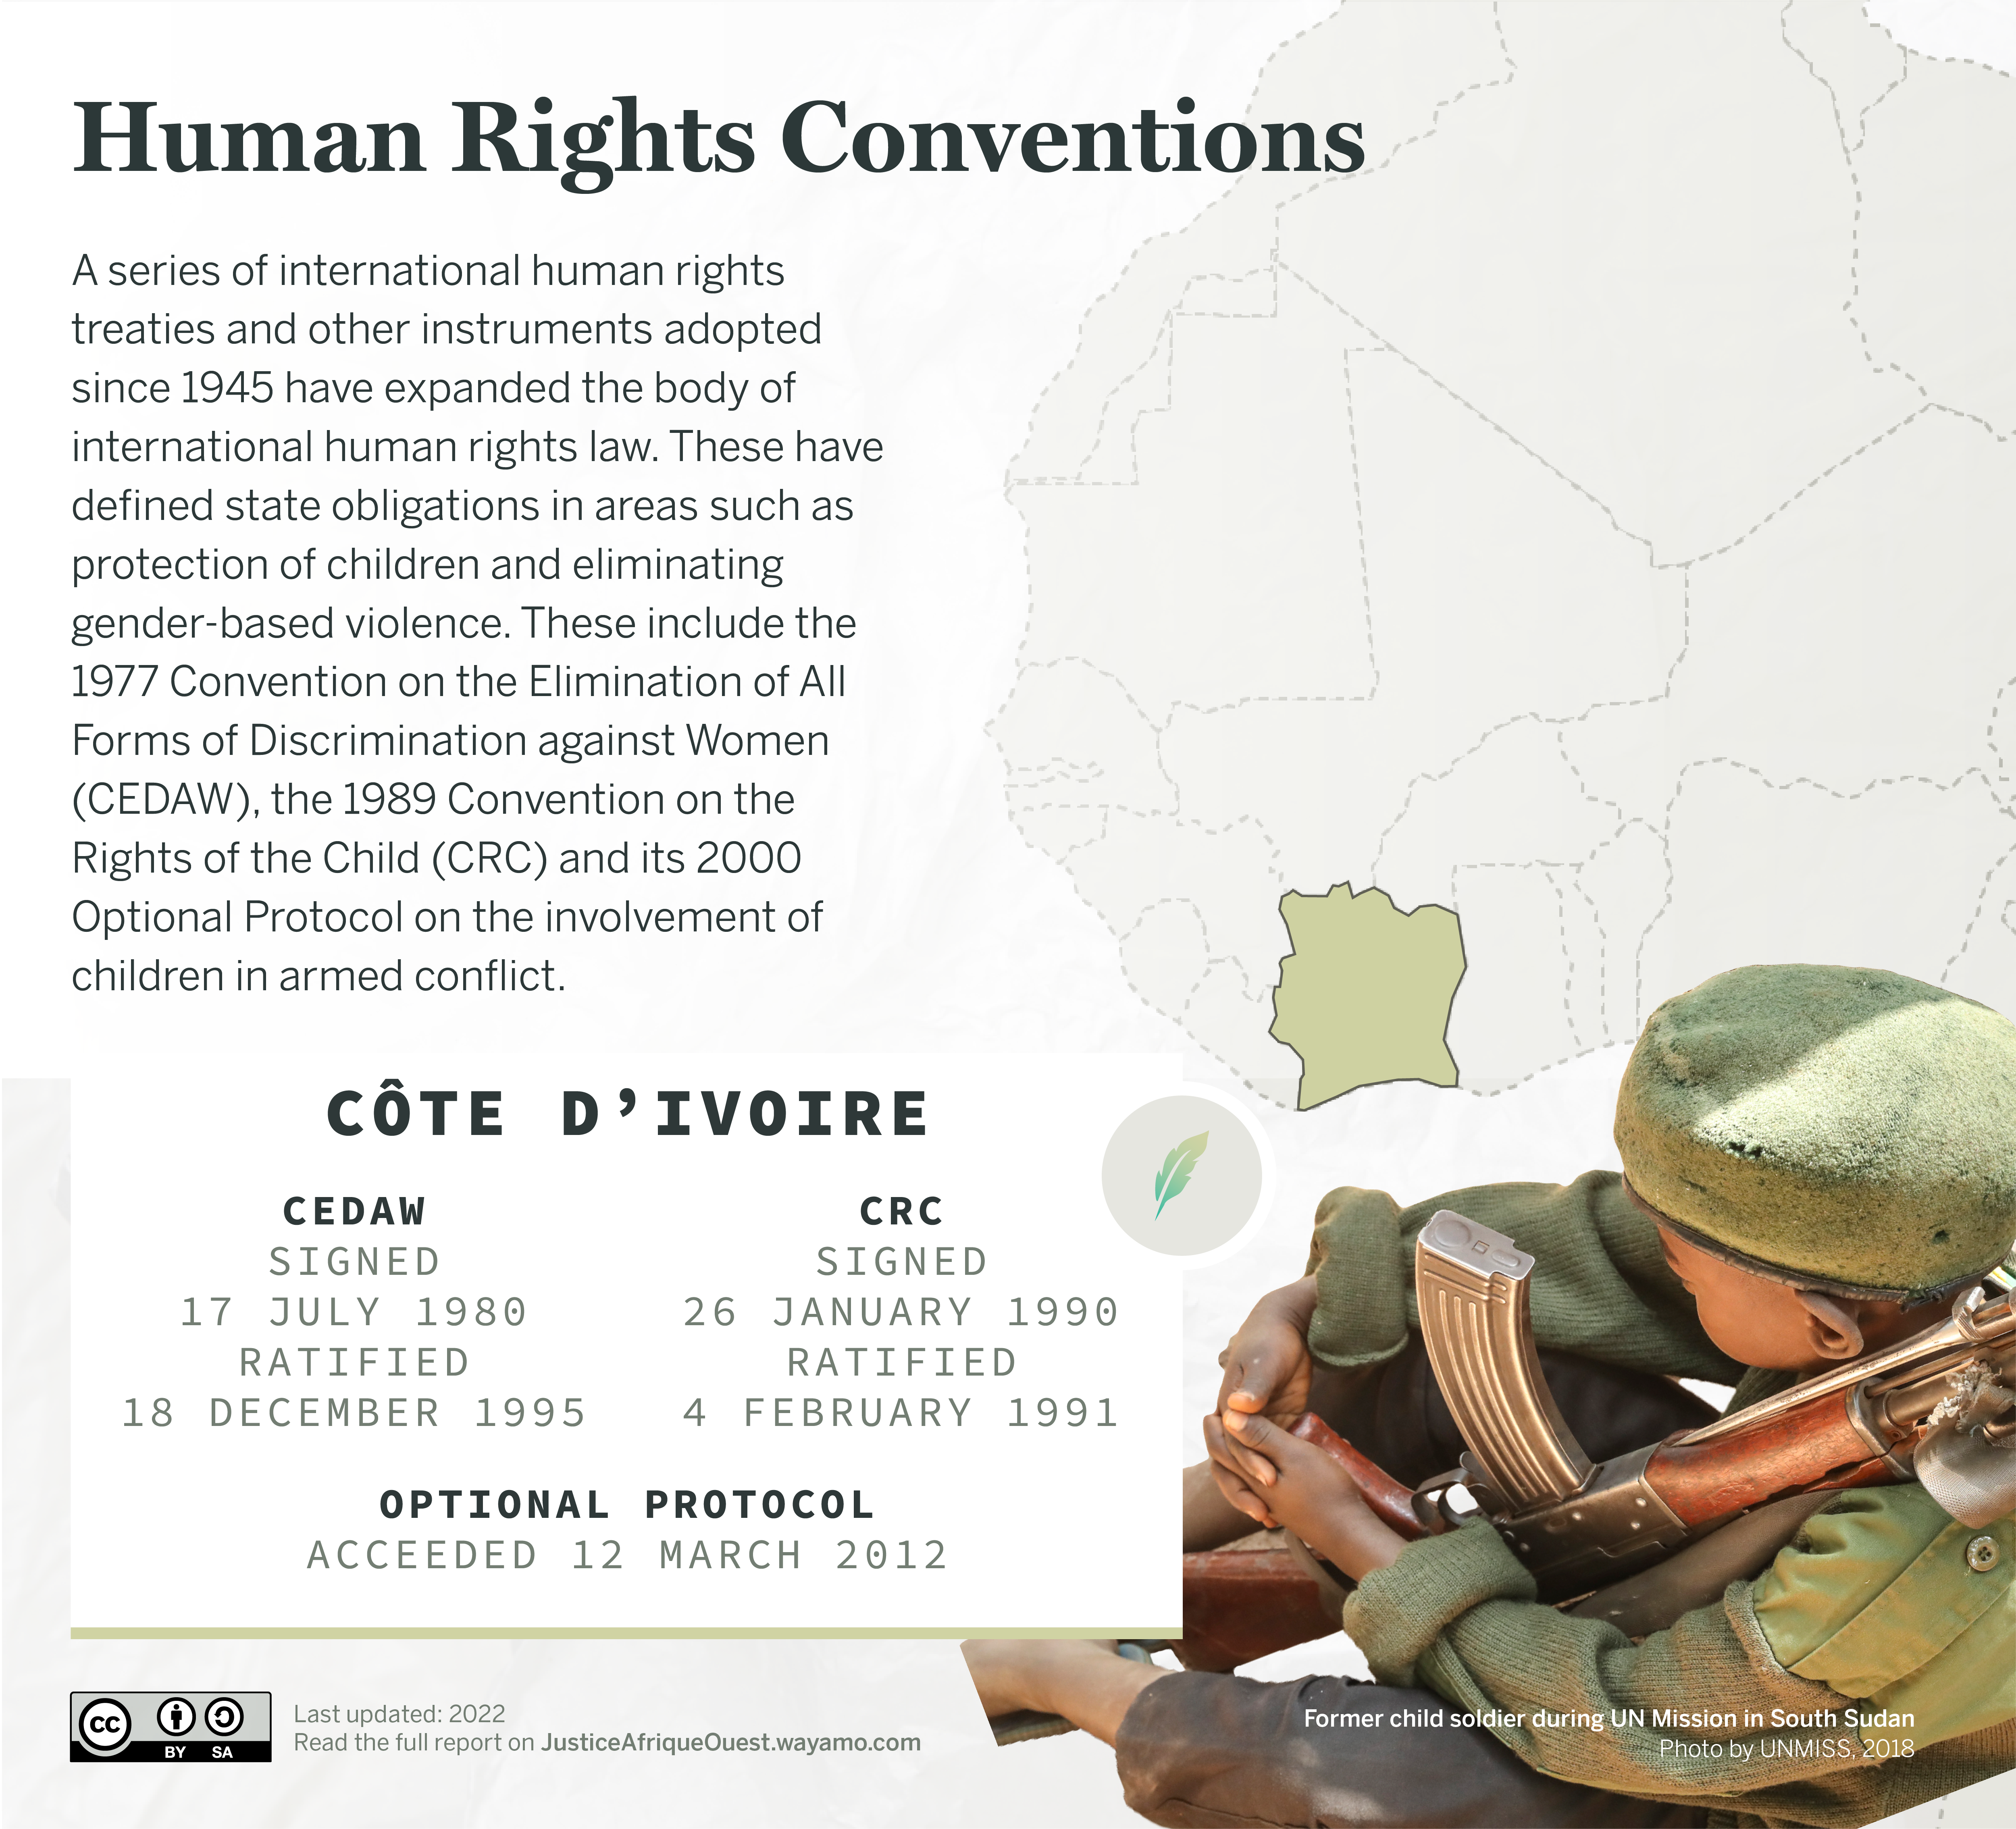 COTE-DIVOIRE_Human-Rights-Conventions_2-Wayamo-Foundation-CC-BY-SA-4.0